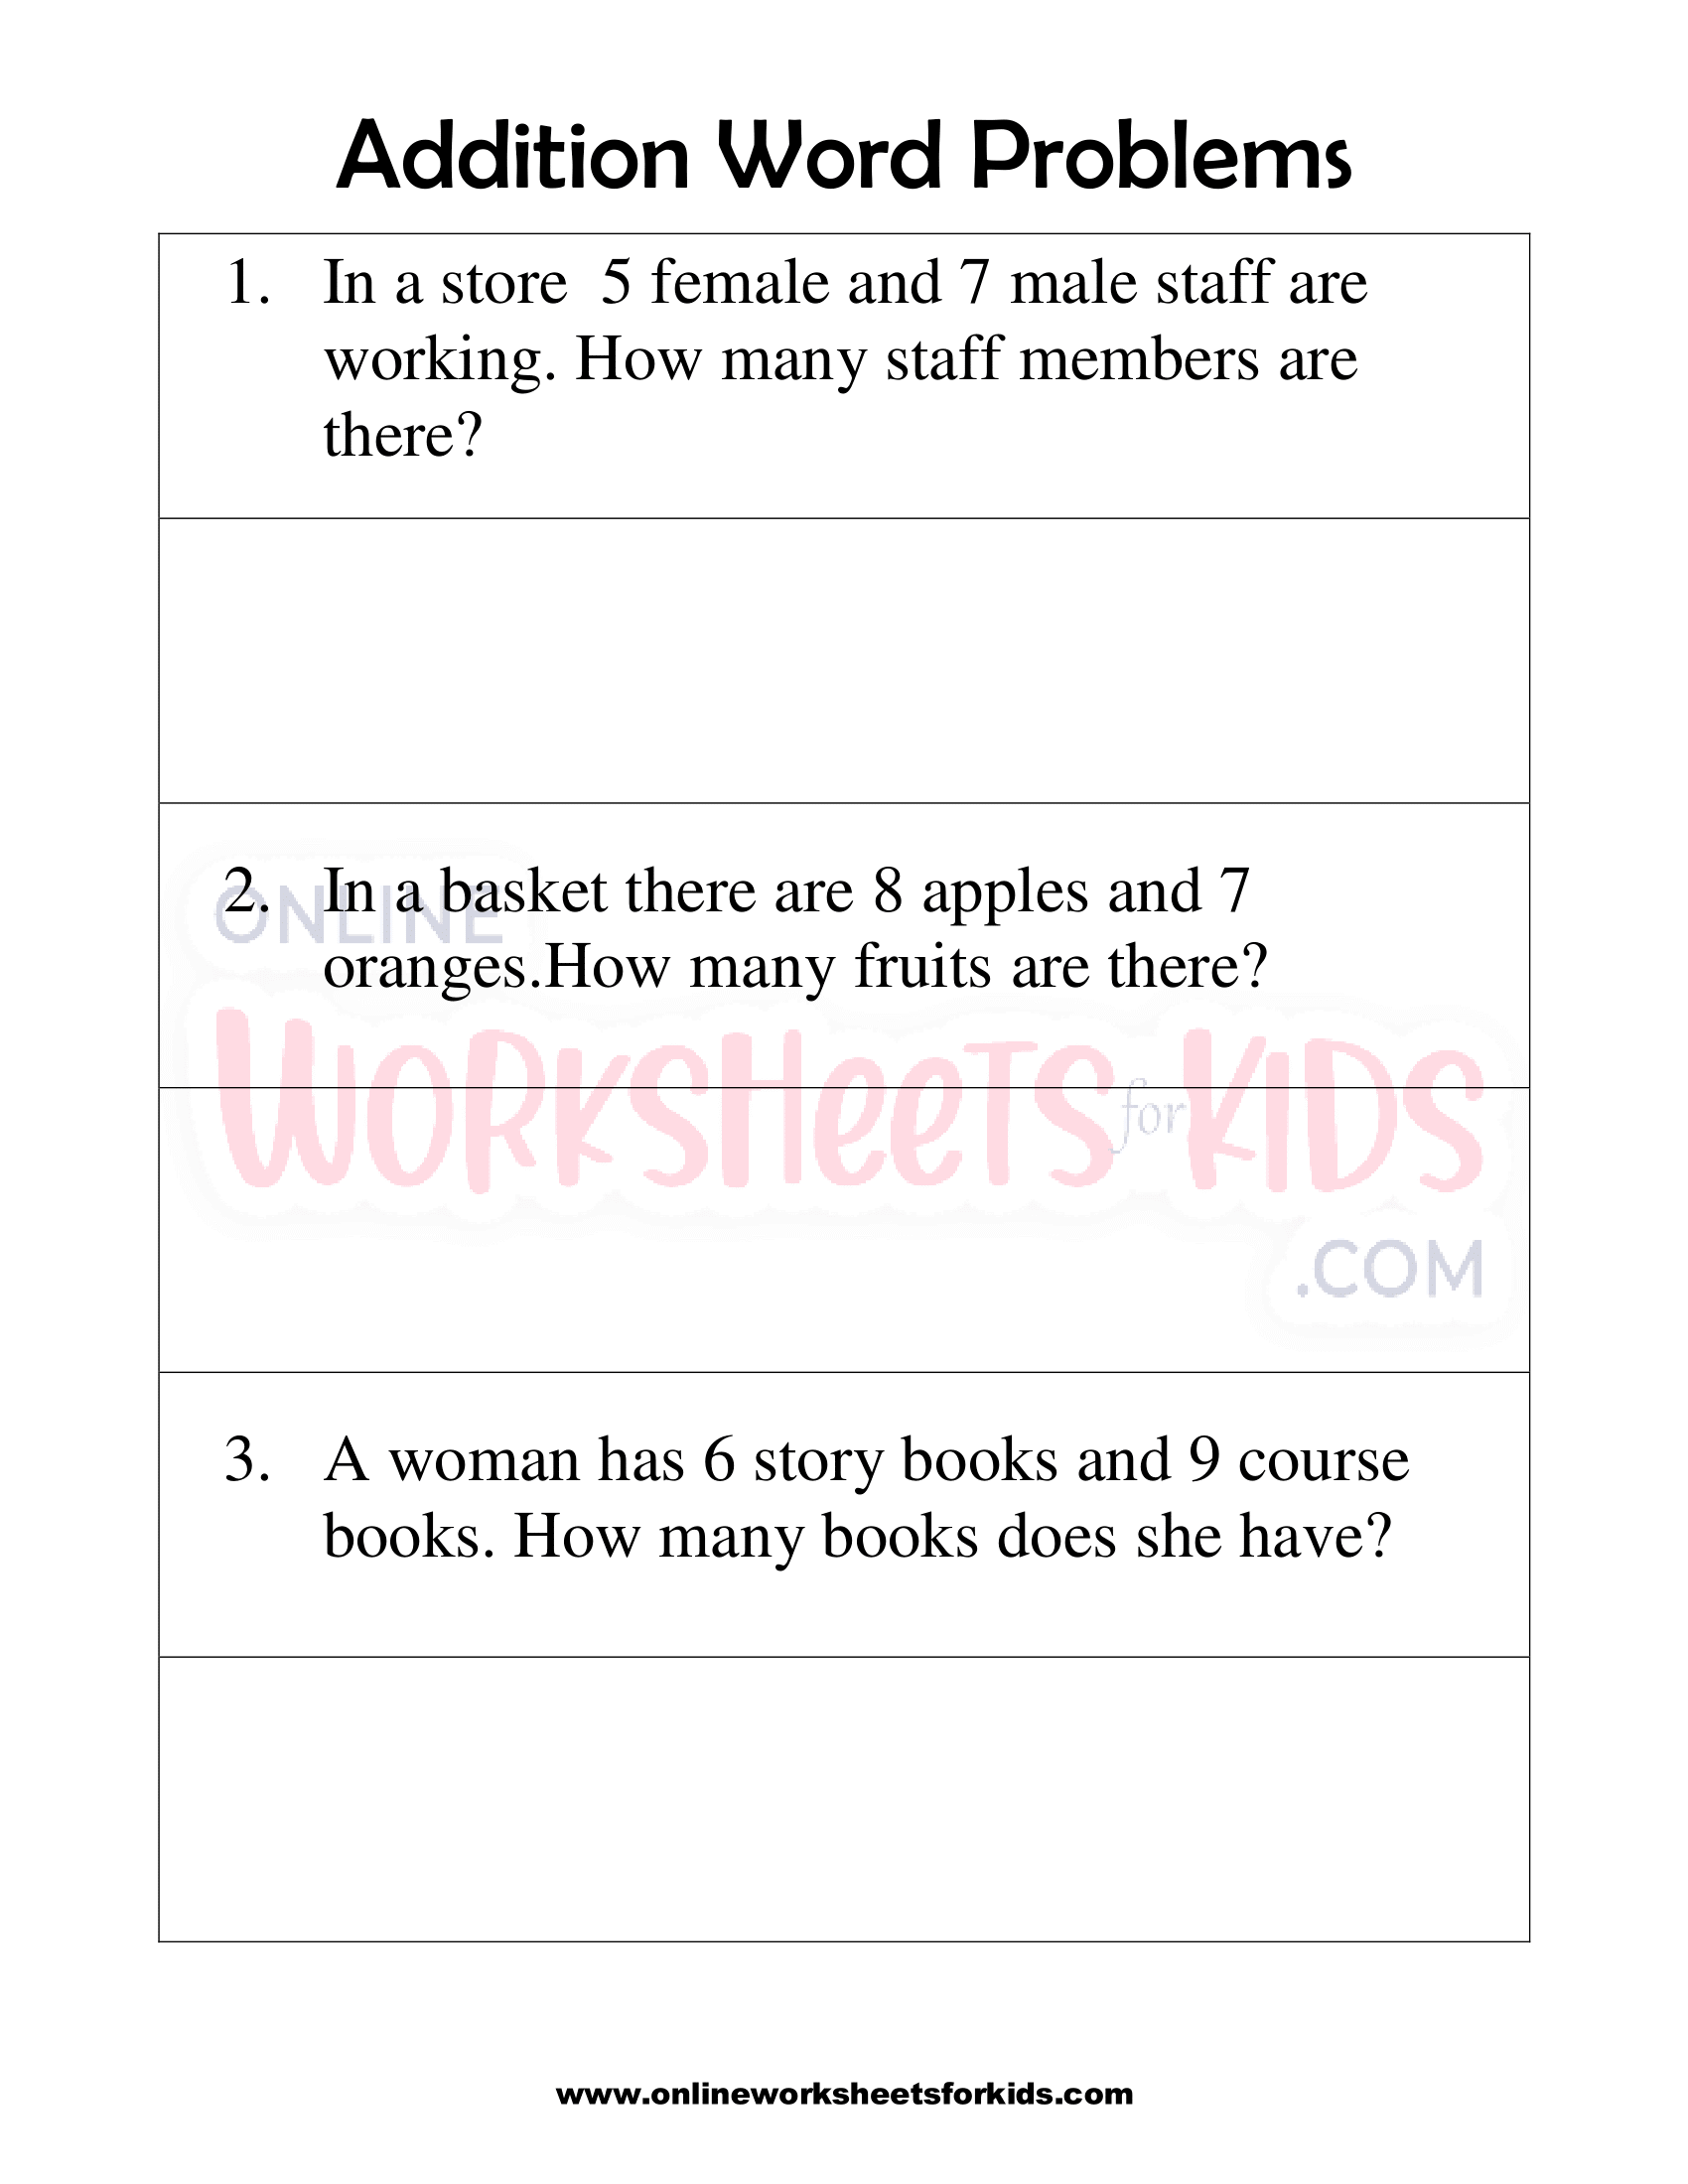 Addition Word Problems 01